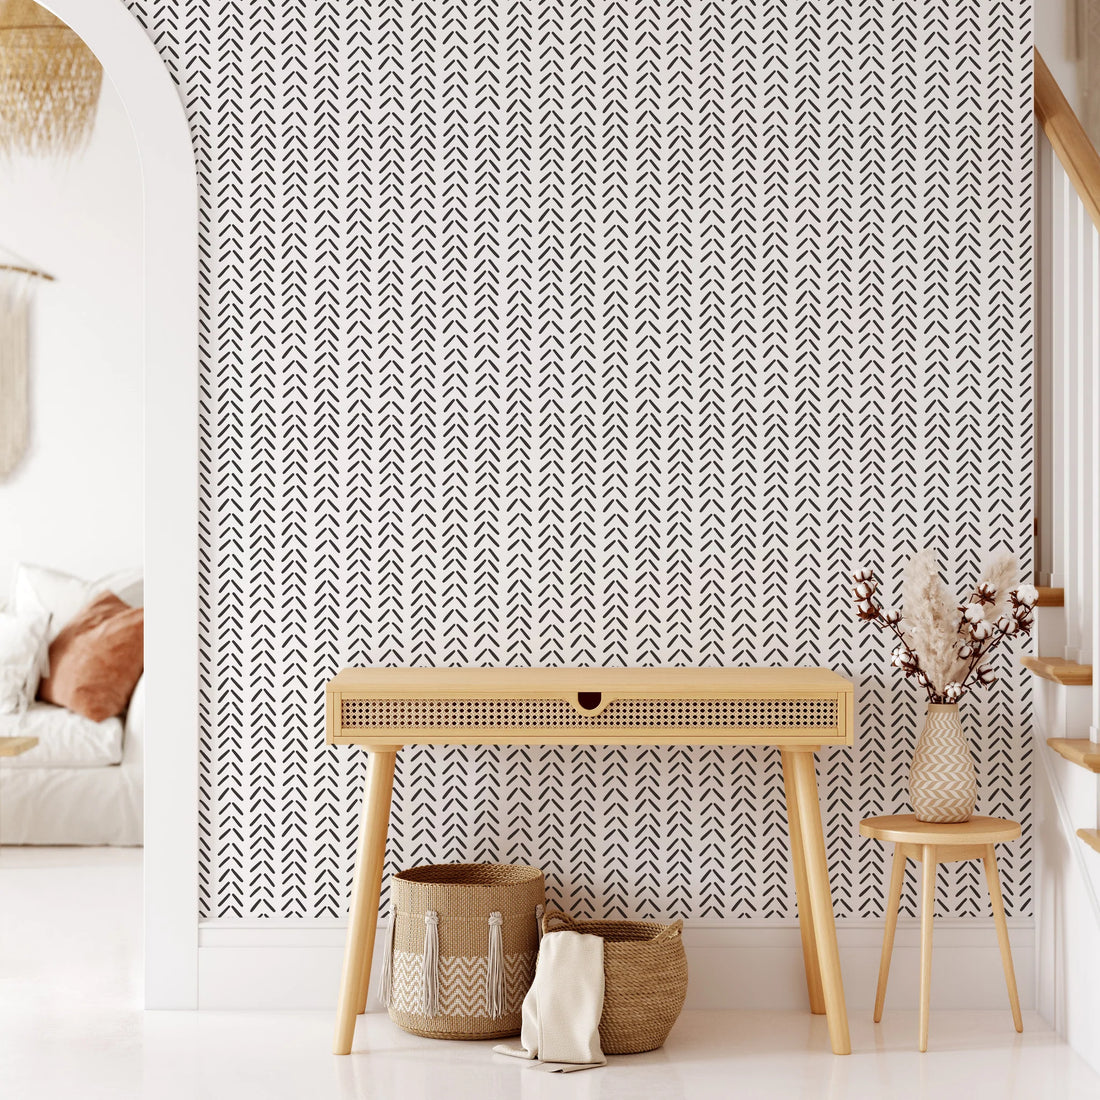 Why Self-Adhesive Wallpaper is the Secret to Easy Room